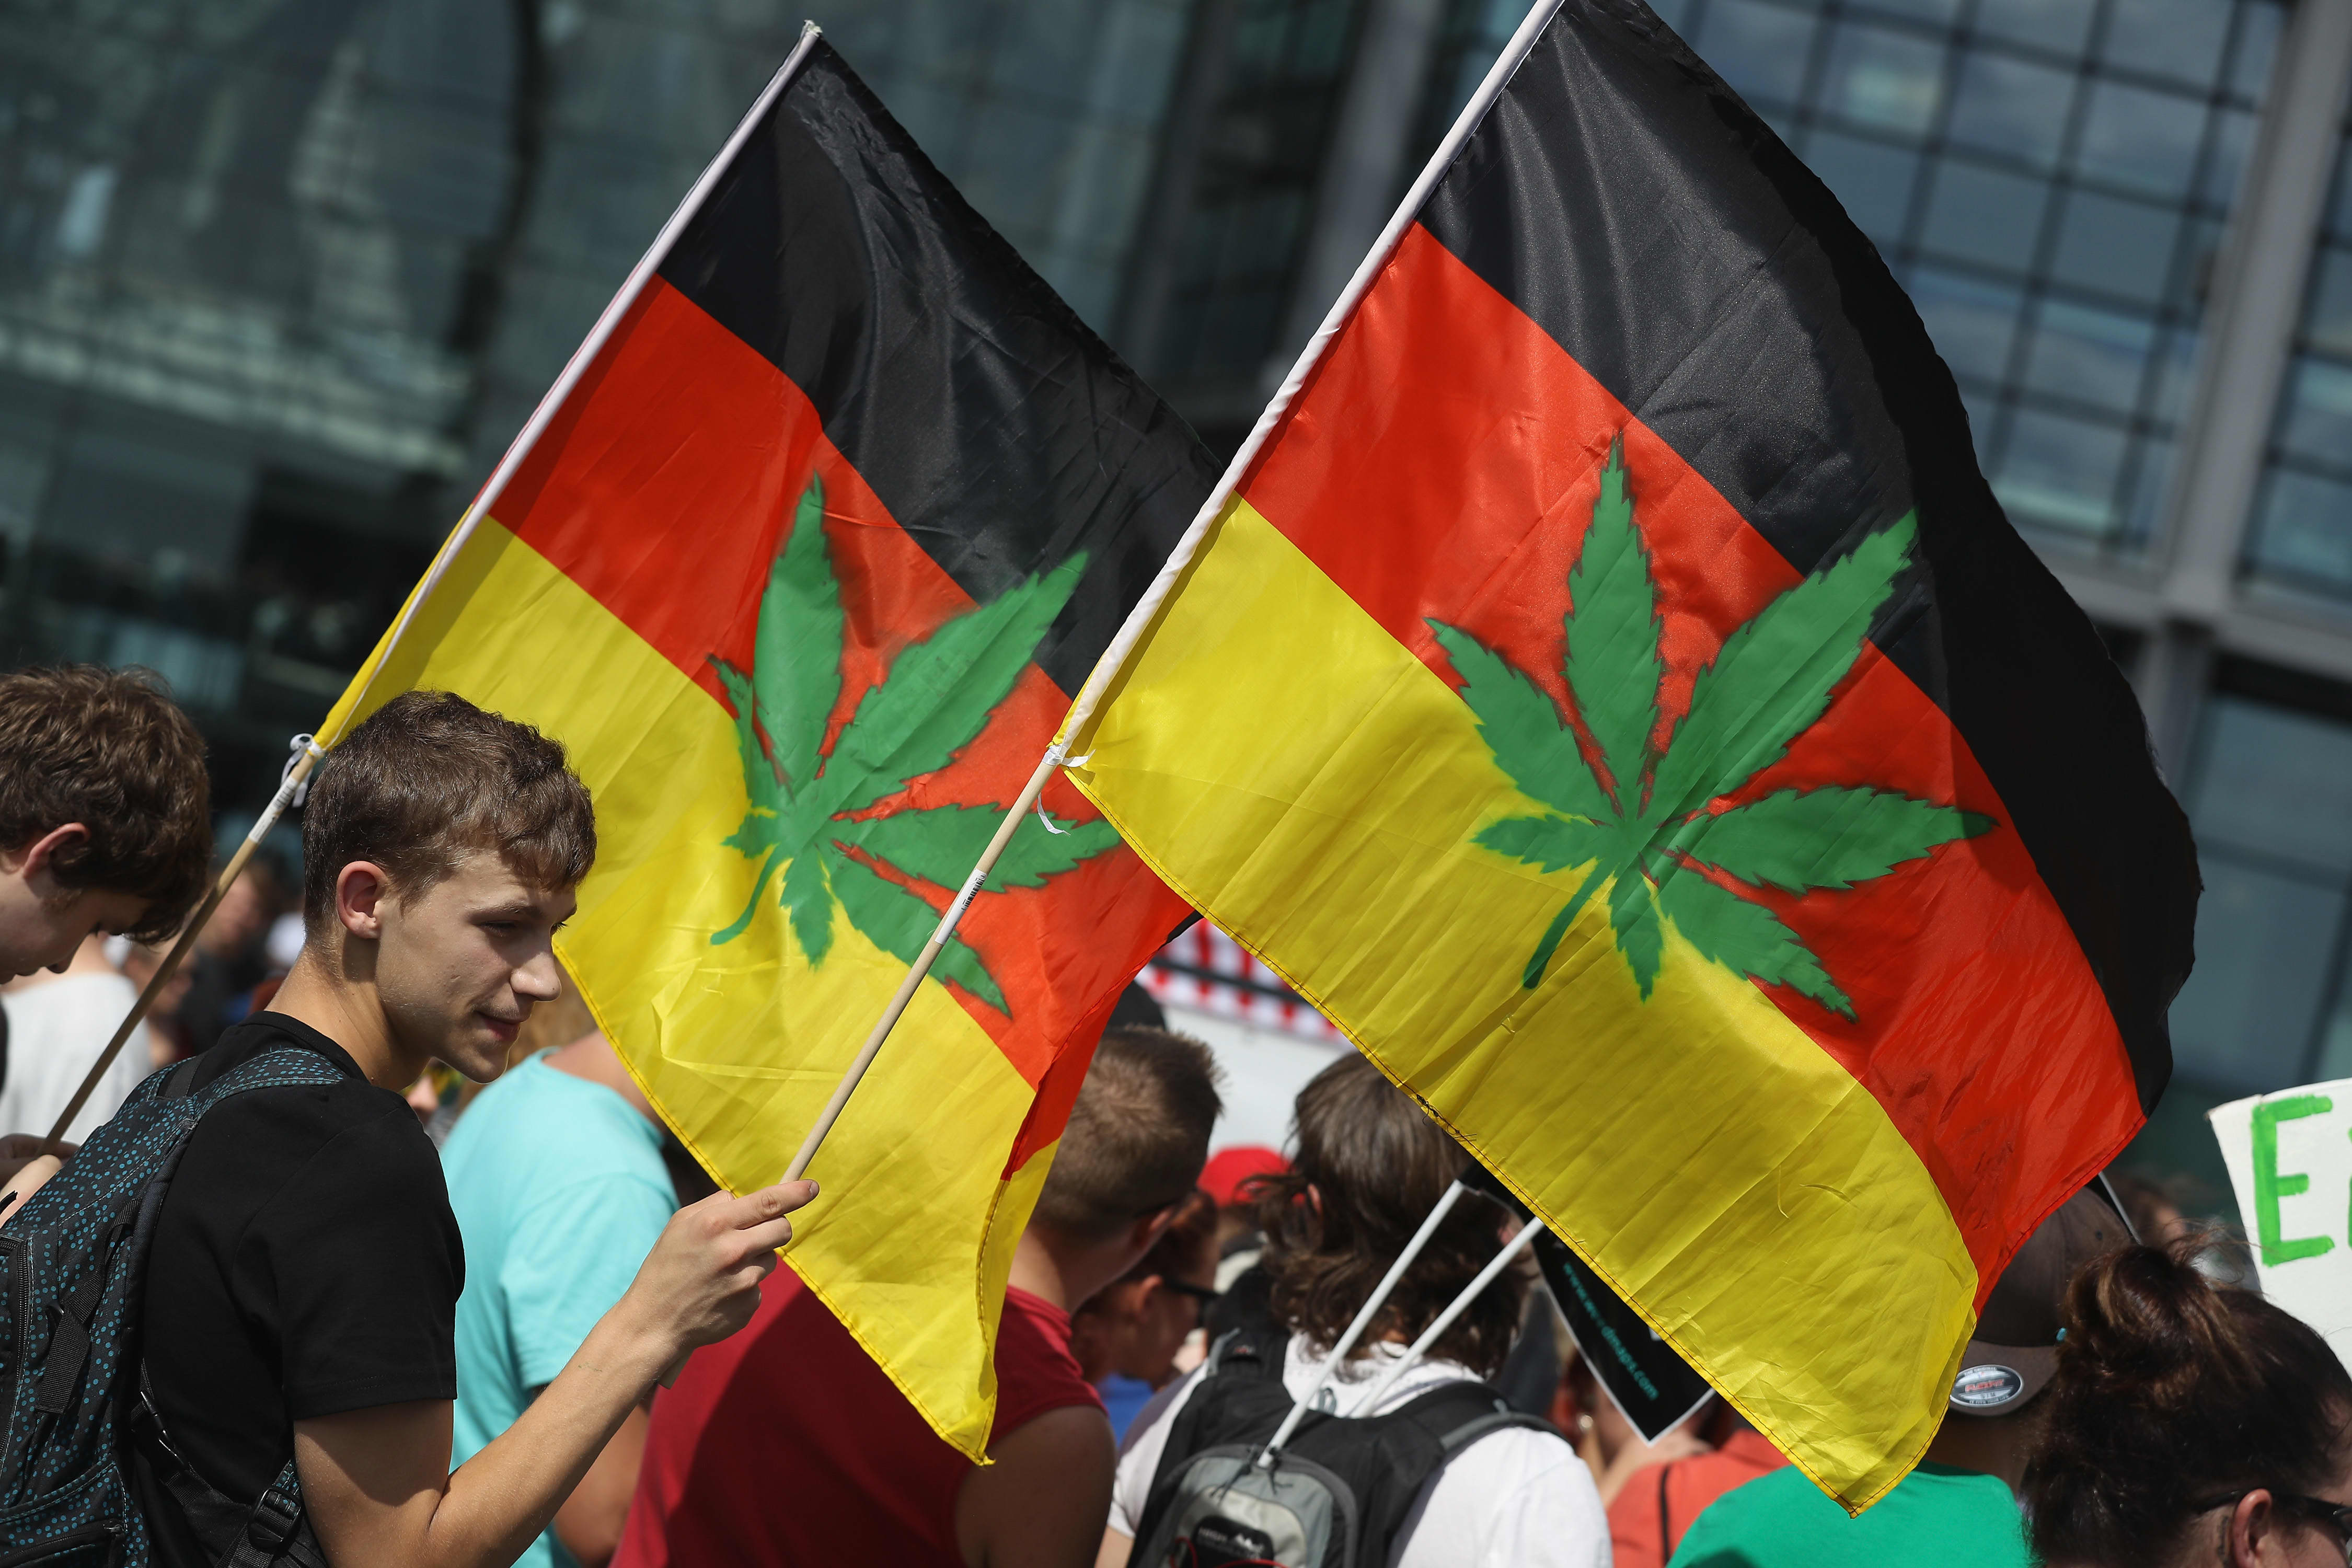 Germany to legalize cannabis use for recreational purposes